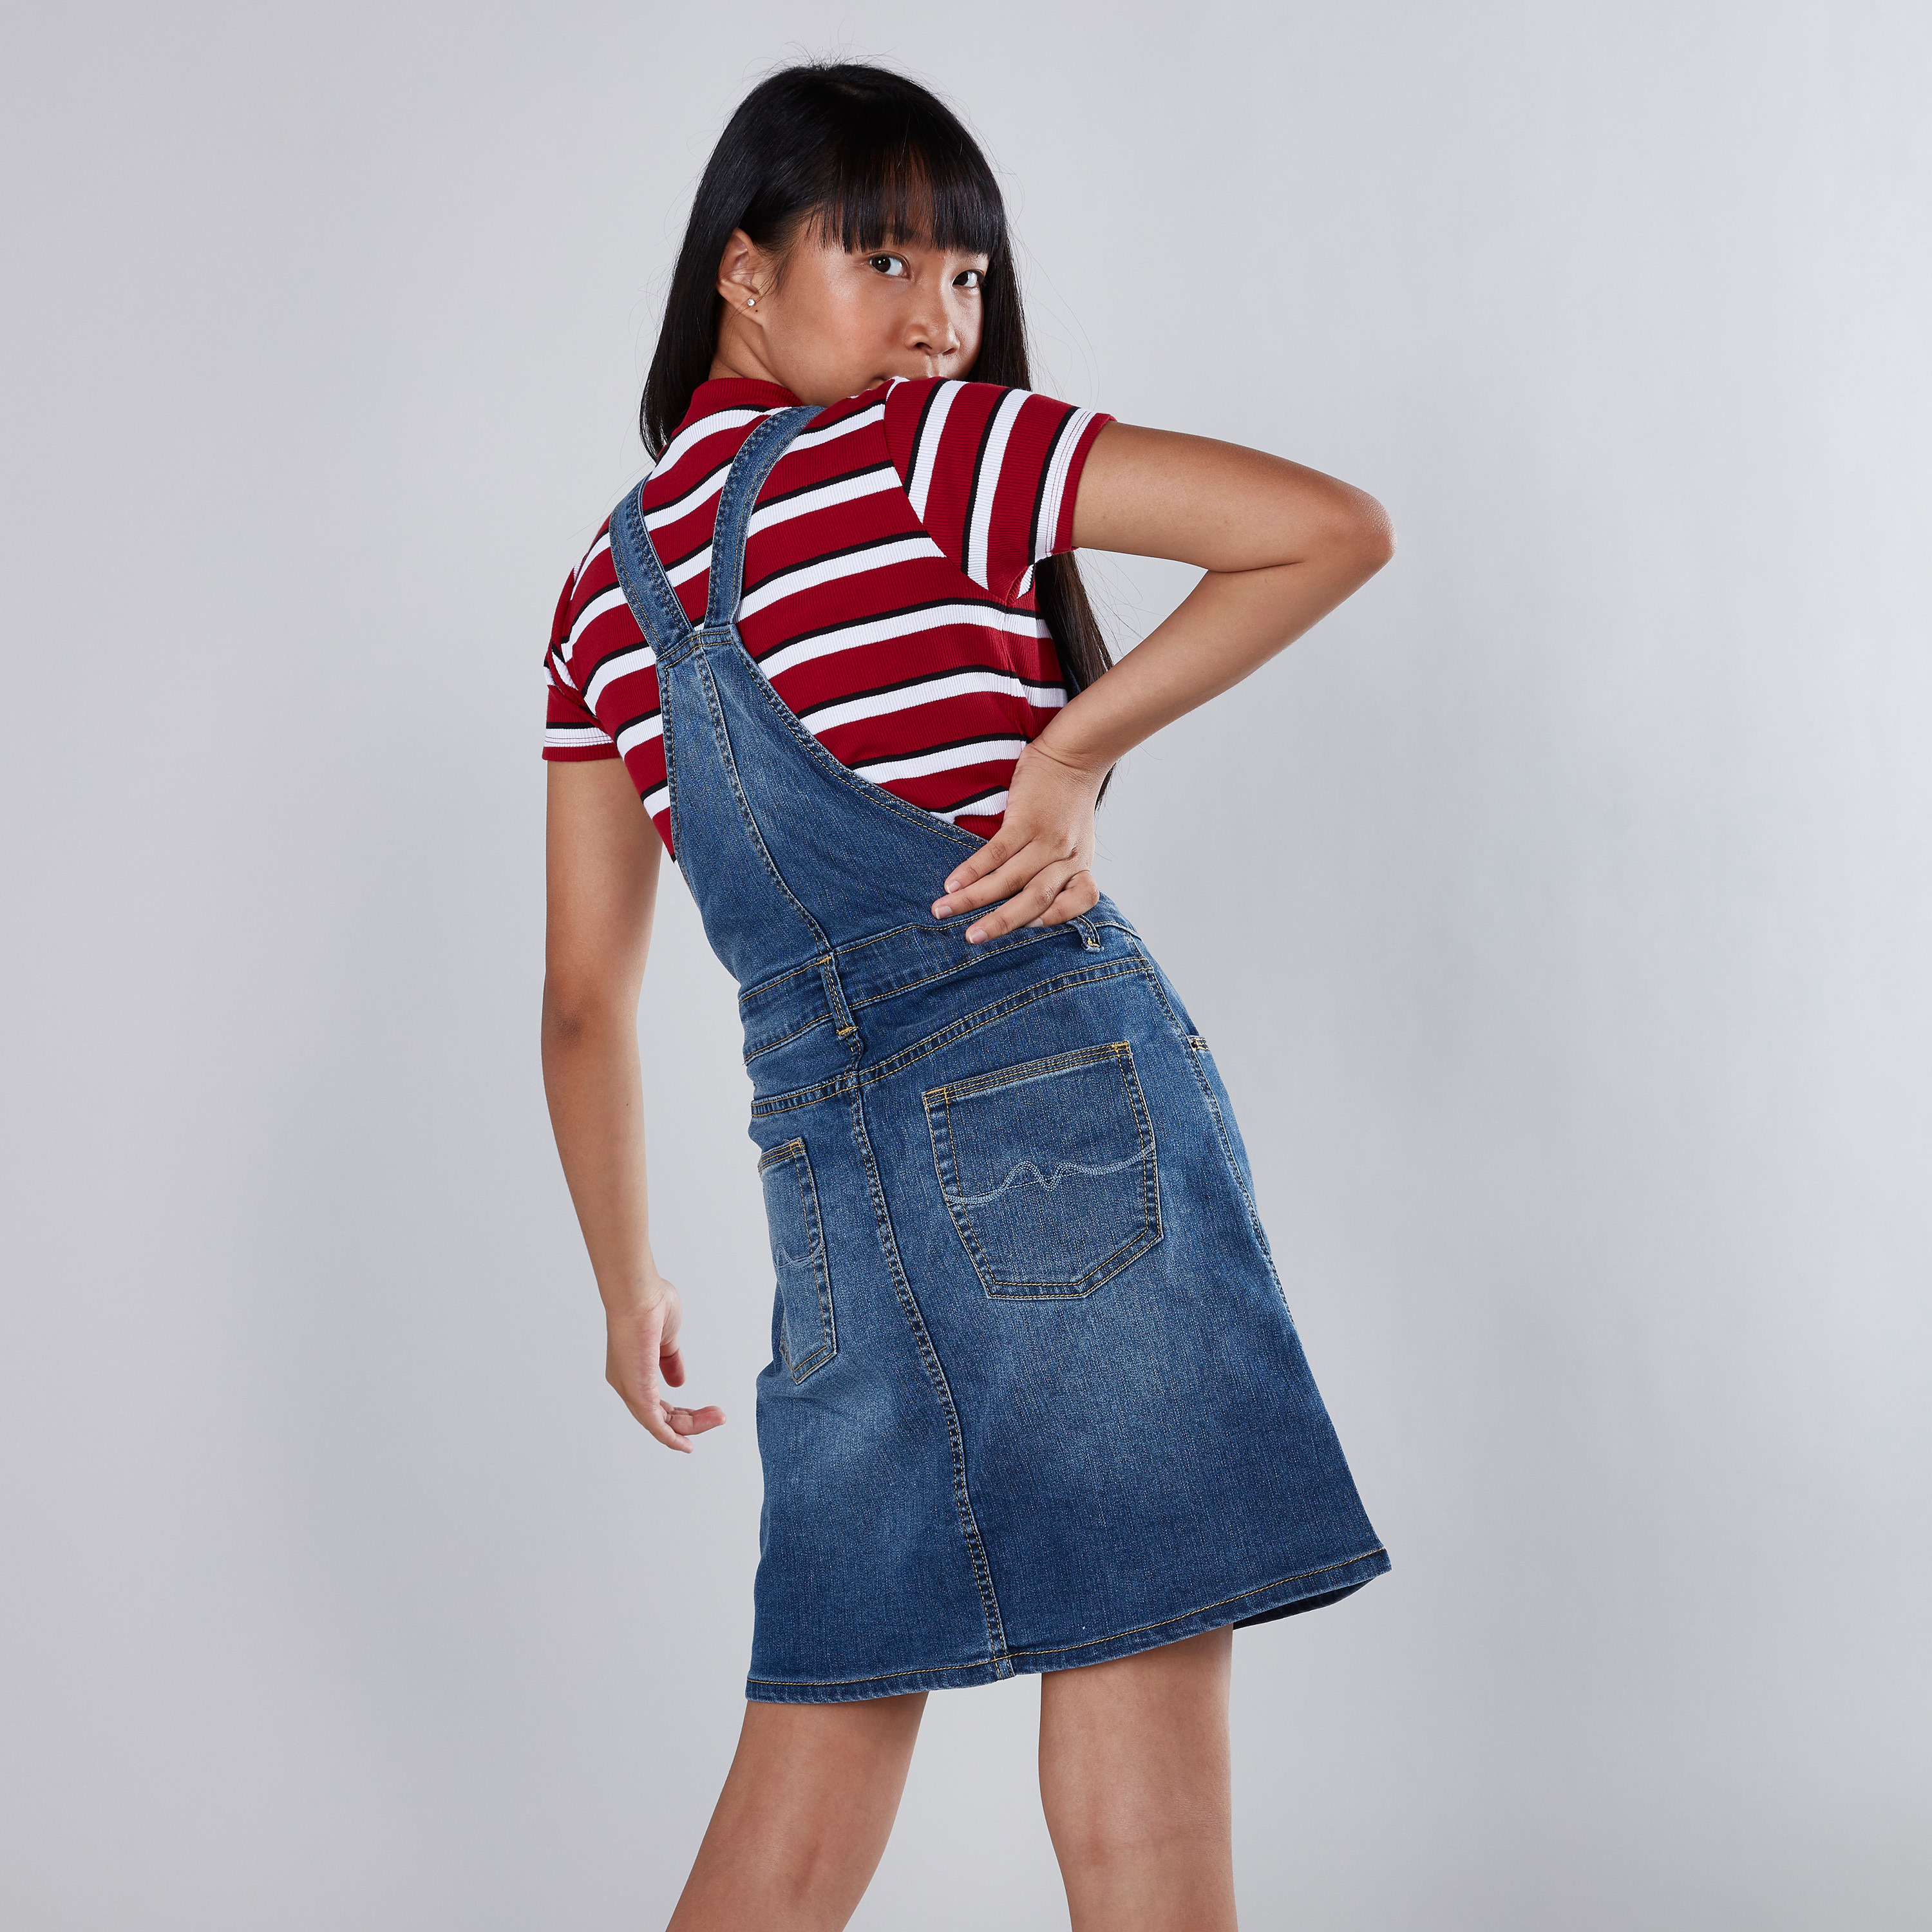 Korean Blue Denim Denim Dress For Women With Oversized Overalls And  Sleeveless Strap For Women Perfect For Spring And Summer Fashion, Knee  Length For Teen Girls From Sunshineavenue36518, $21.72 | DHgate.Com